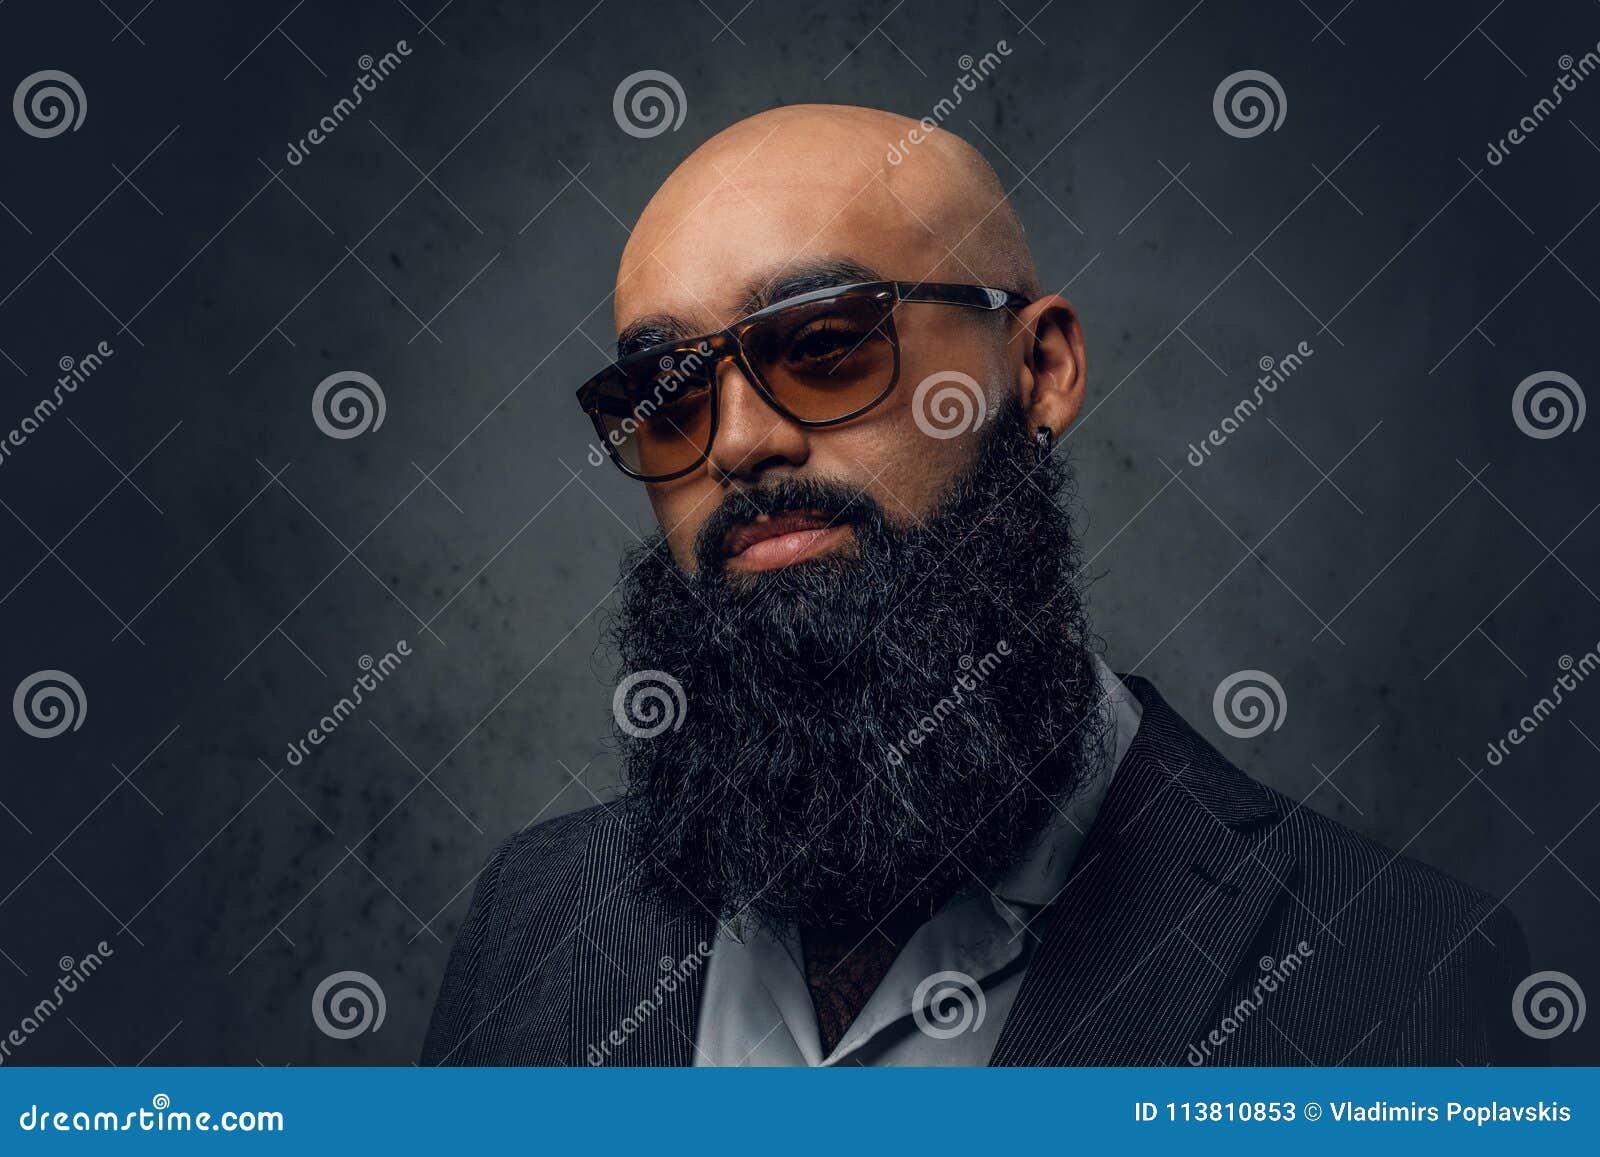 Arabic Bearded Shaved Head Male in Sunglasses. Stock Image - Image of  expression, modern: 113810853